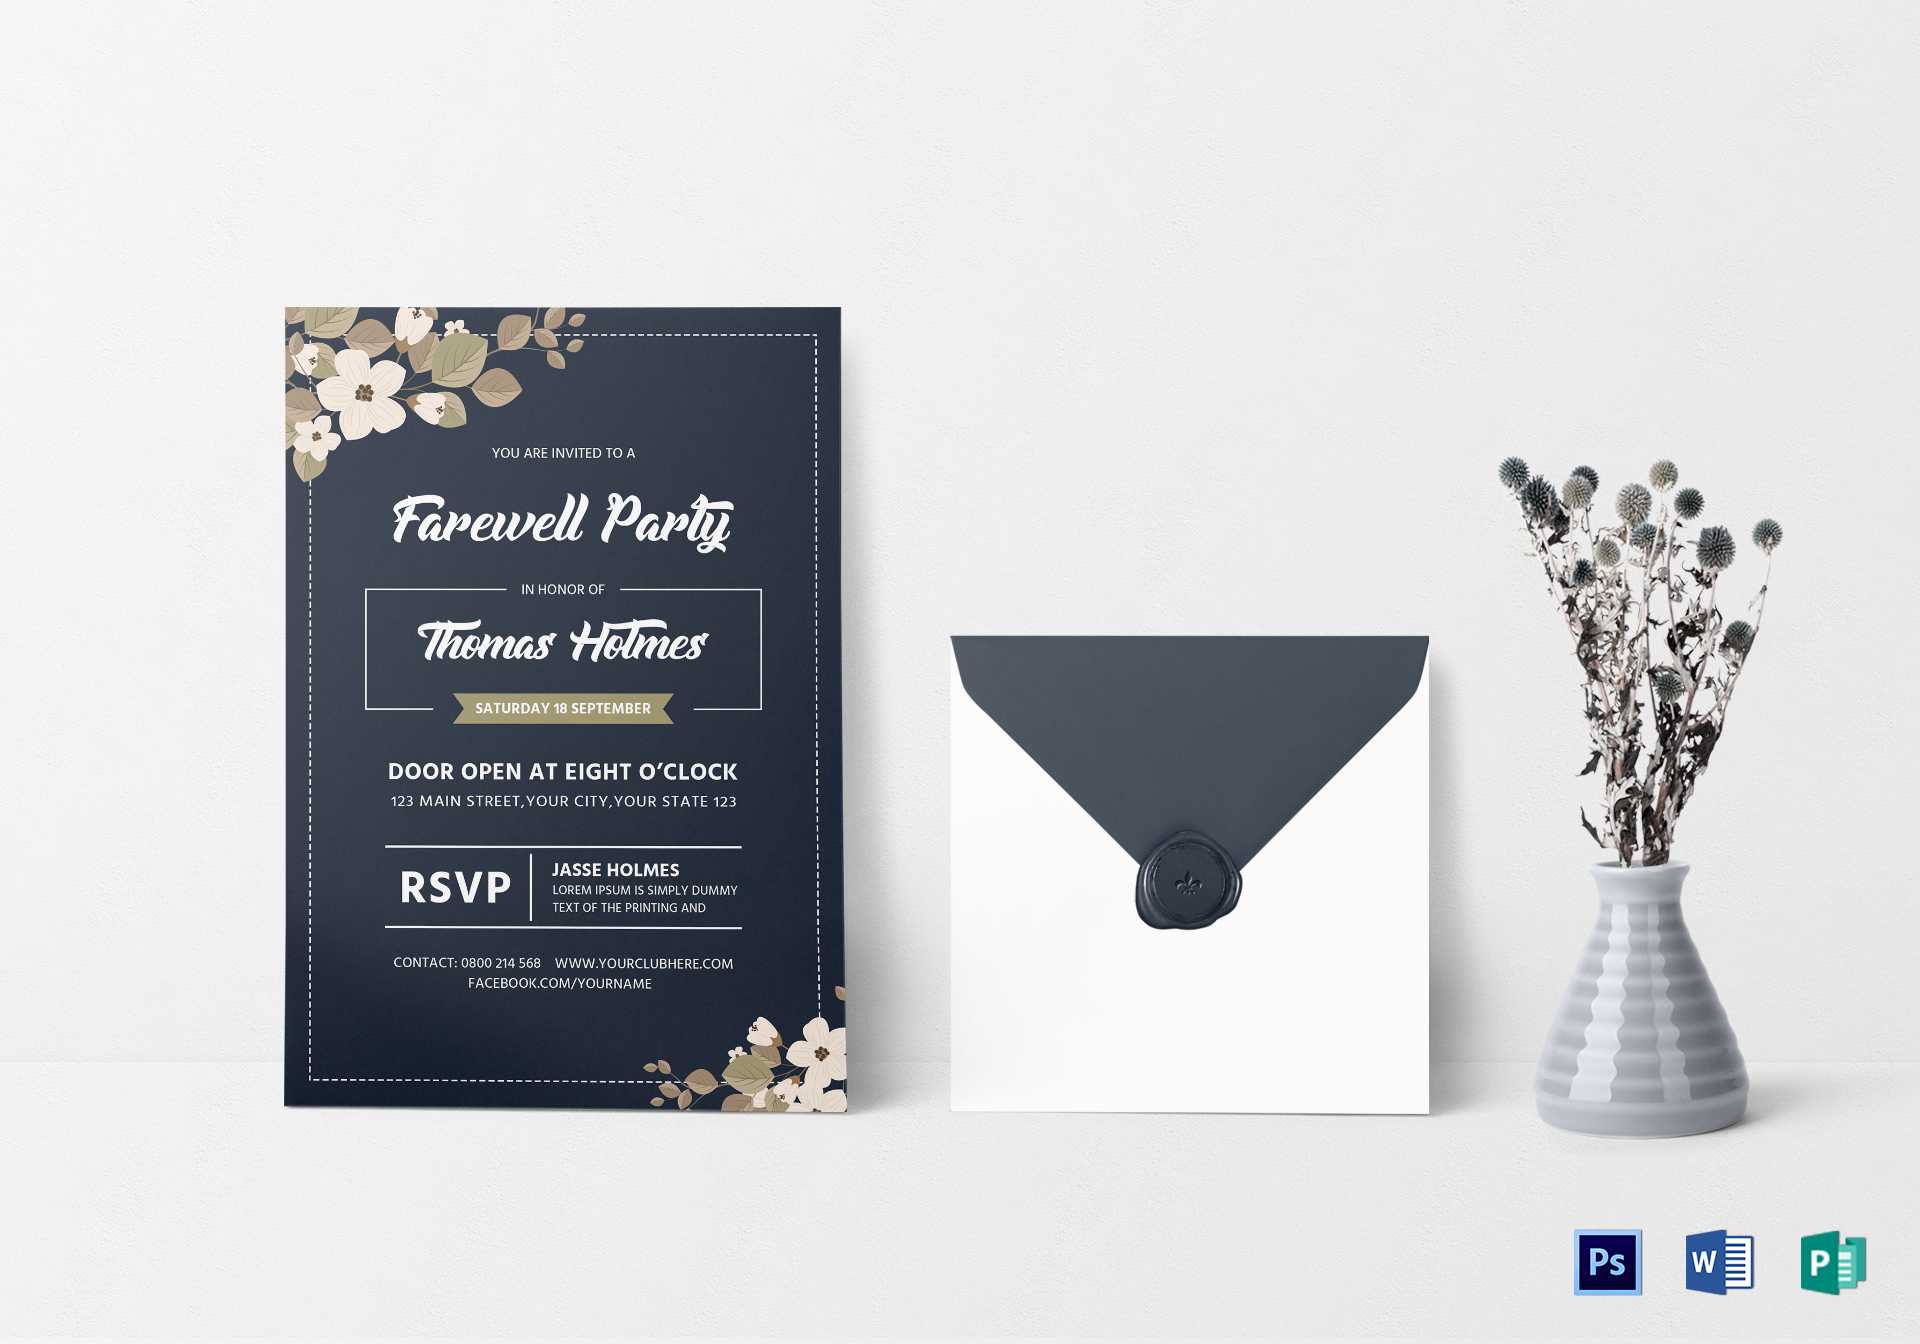 Farewell Party Invitation Card Template Regarding Farewell Pertaining To Farewell Invitation Card Template